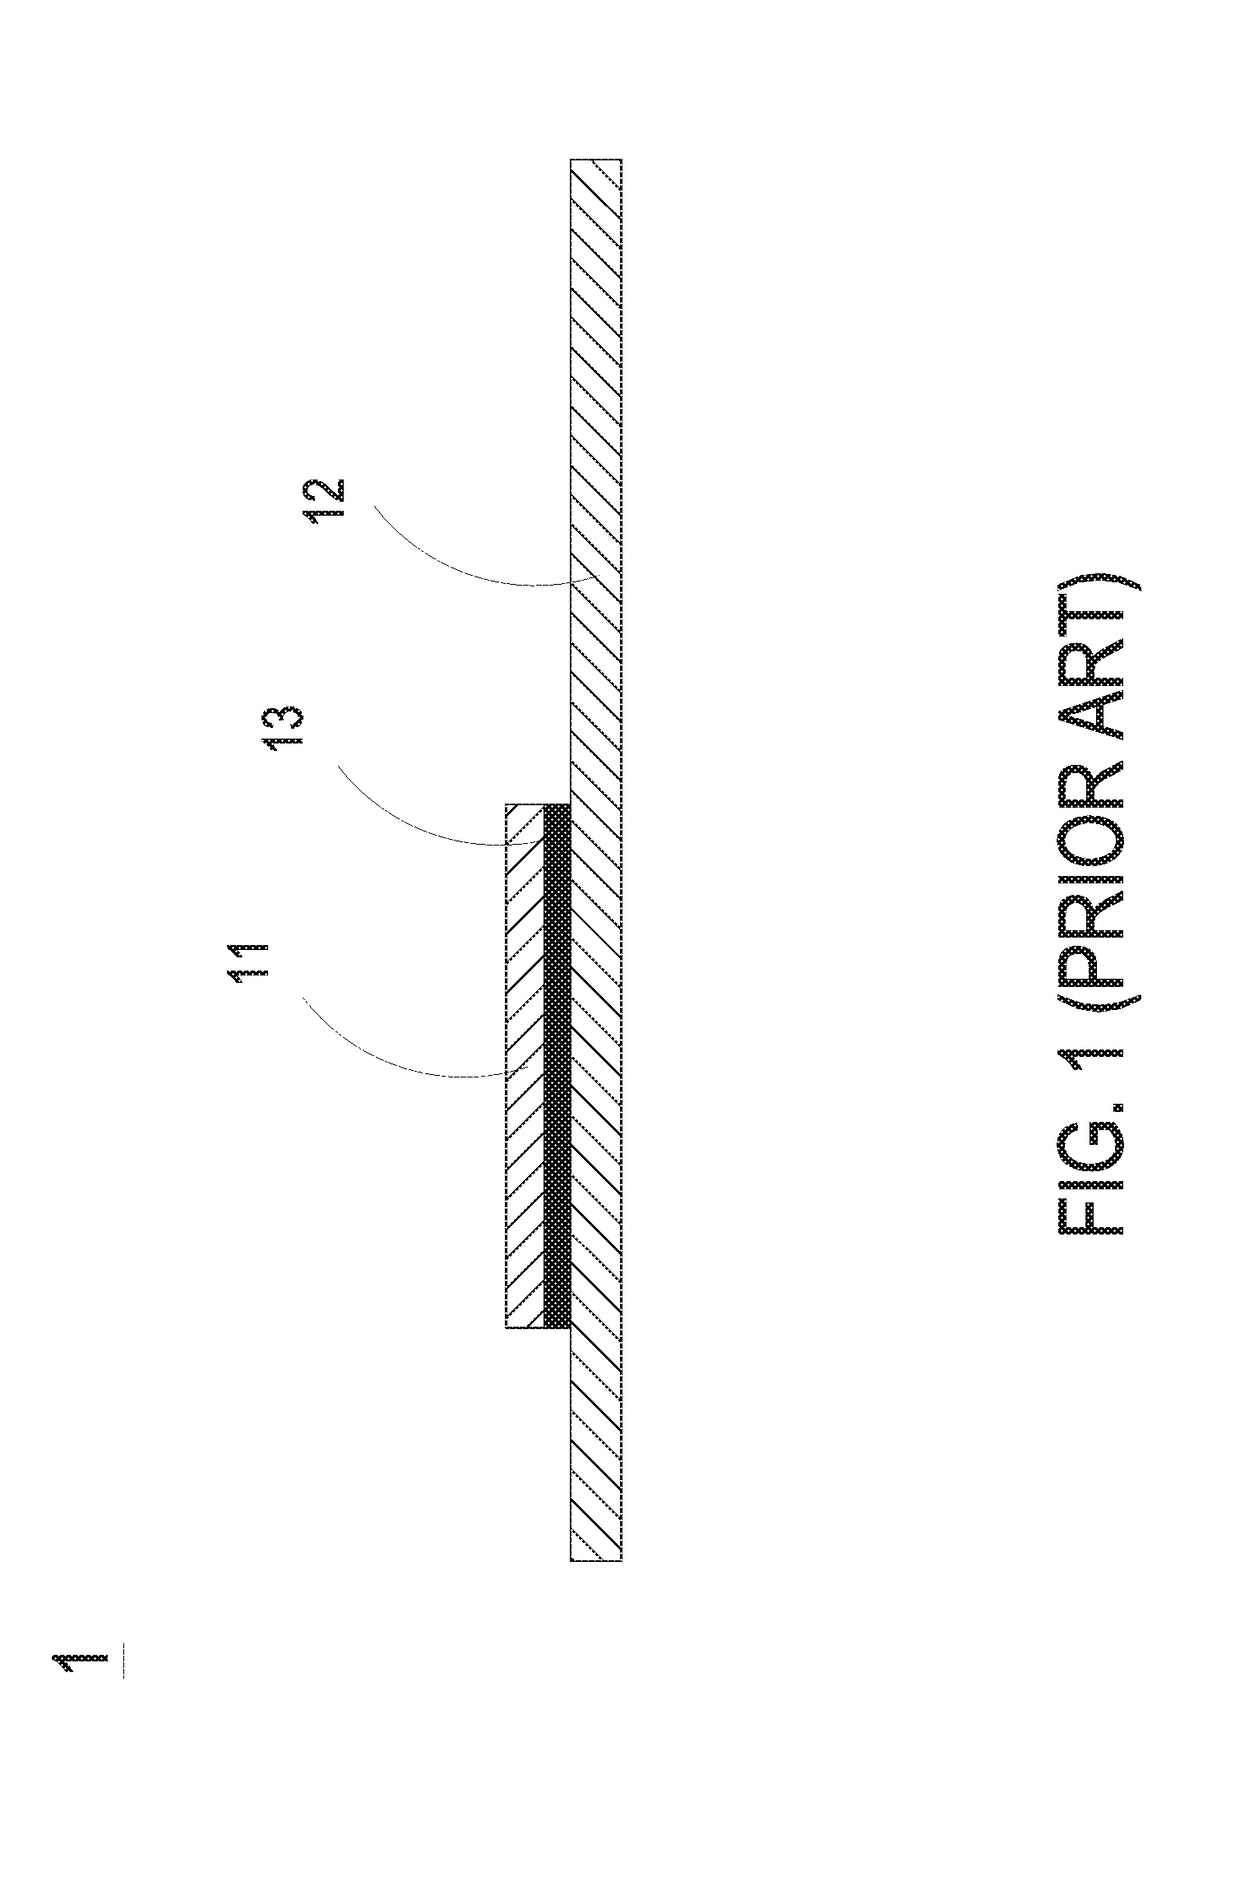 Air-cooling heat dissipation device and system